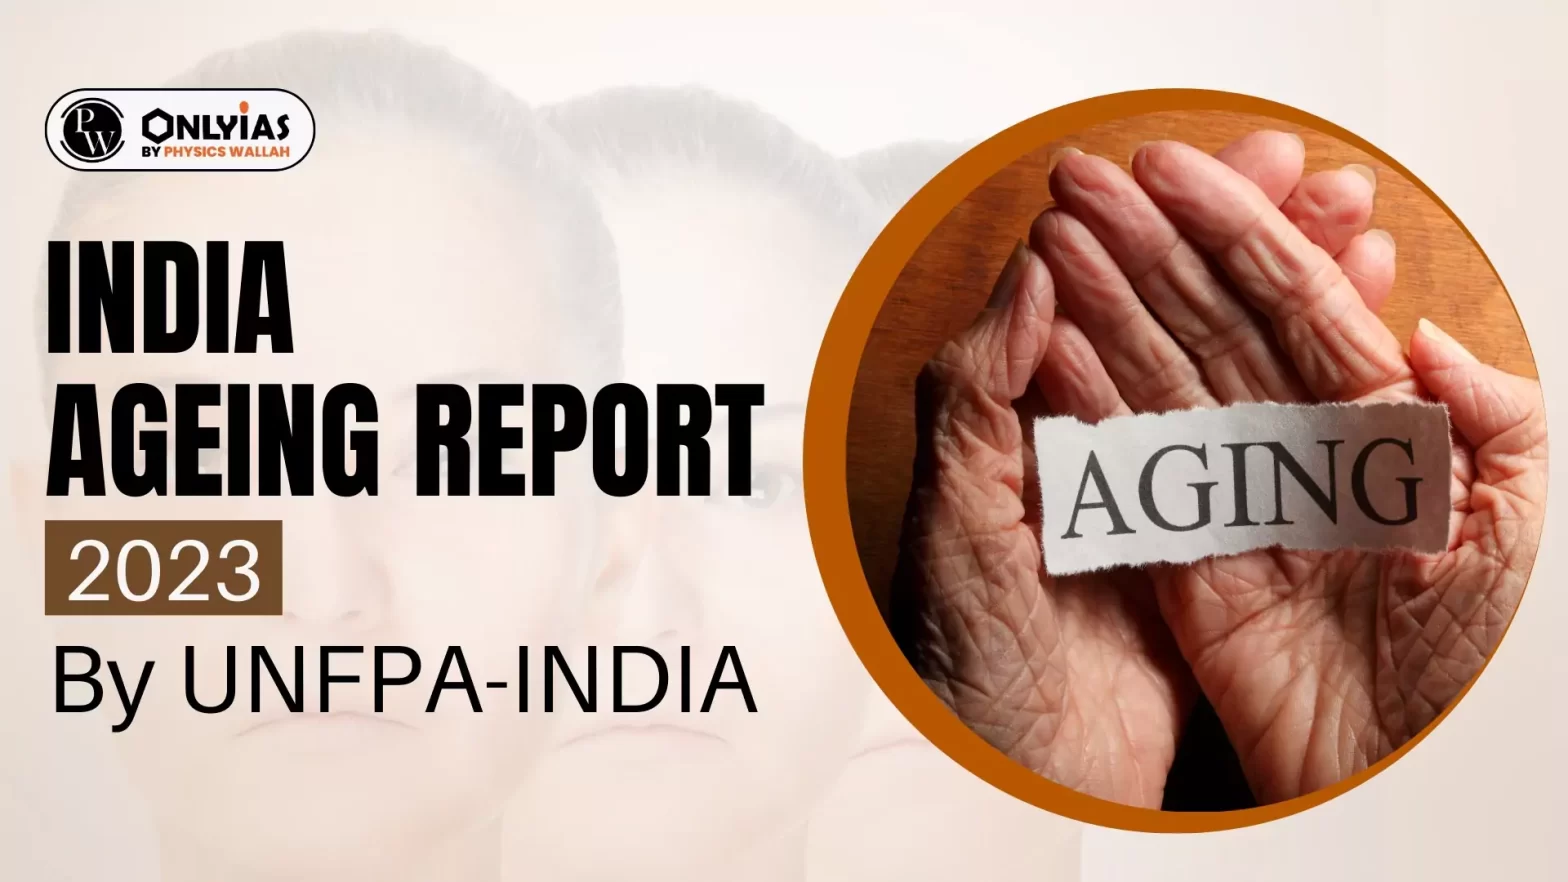 India Ageing Report 2023 By UNFPA-INDIA